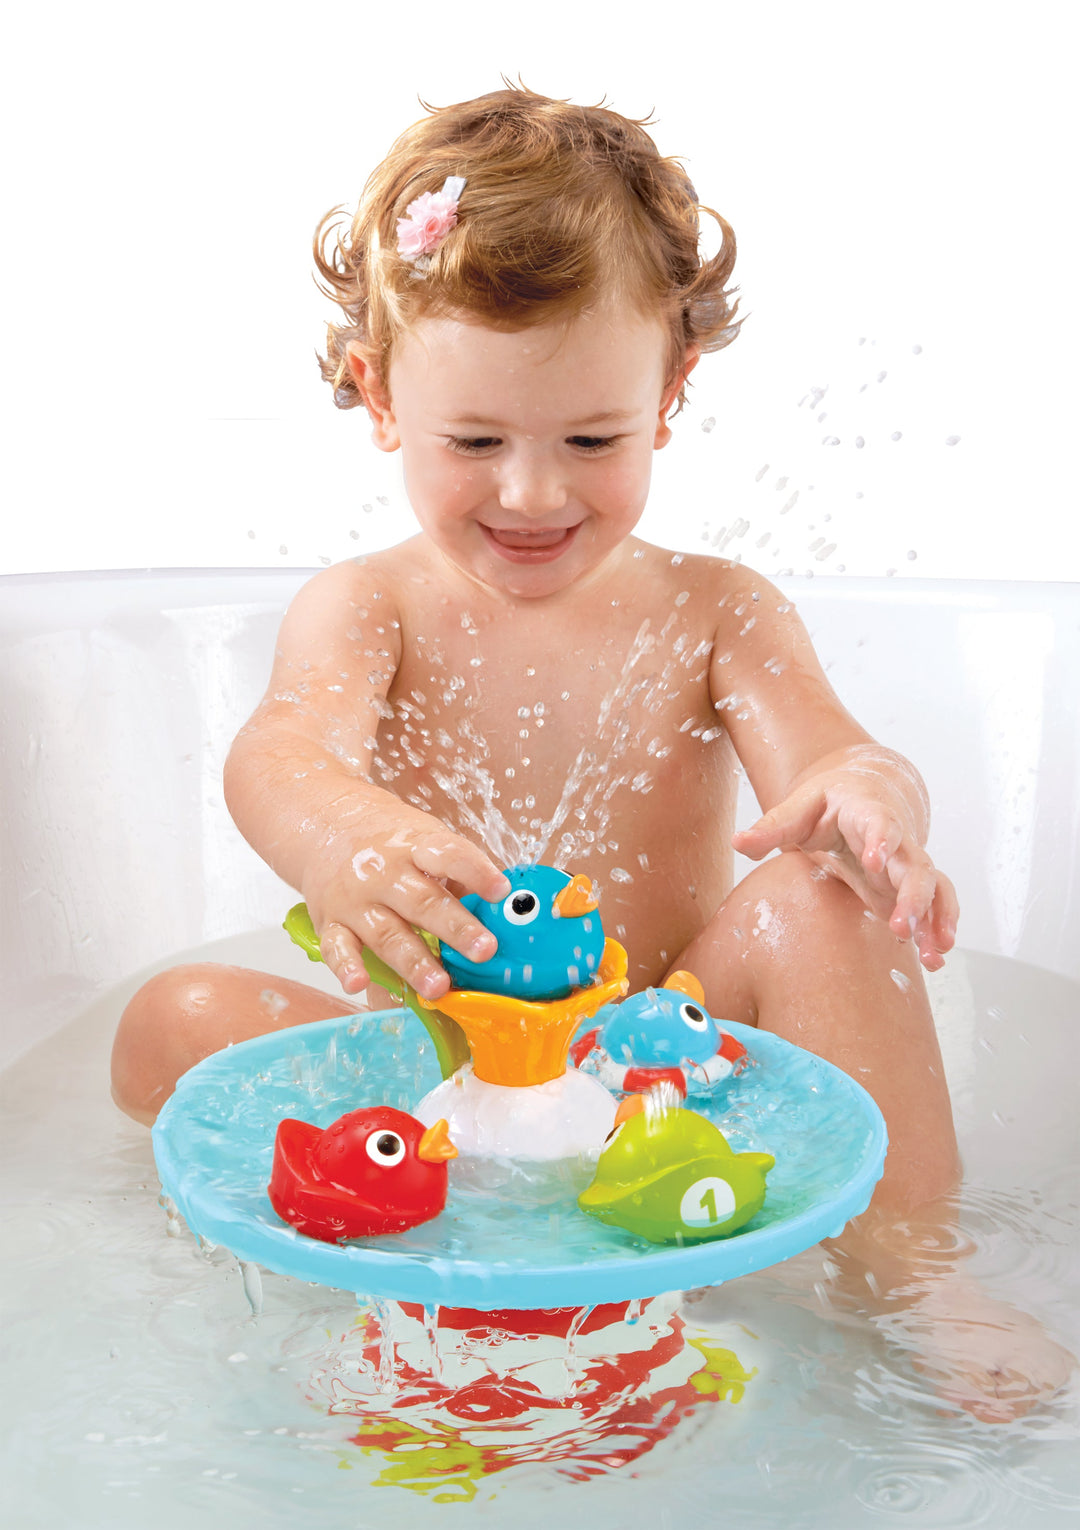 Yookidoo Automatic Shut-off Battery-operated 4 Colourful Magical Duck Race Bath Toy